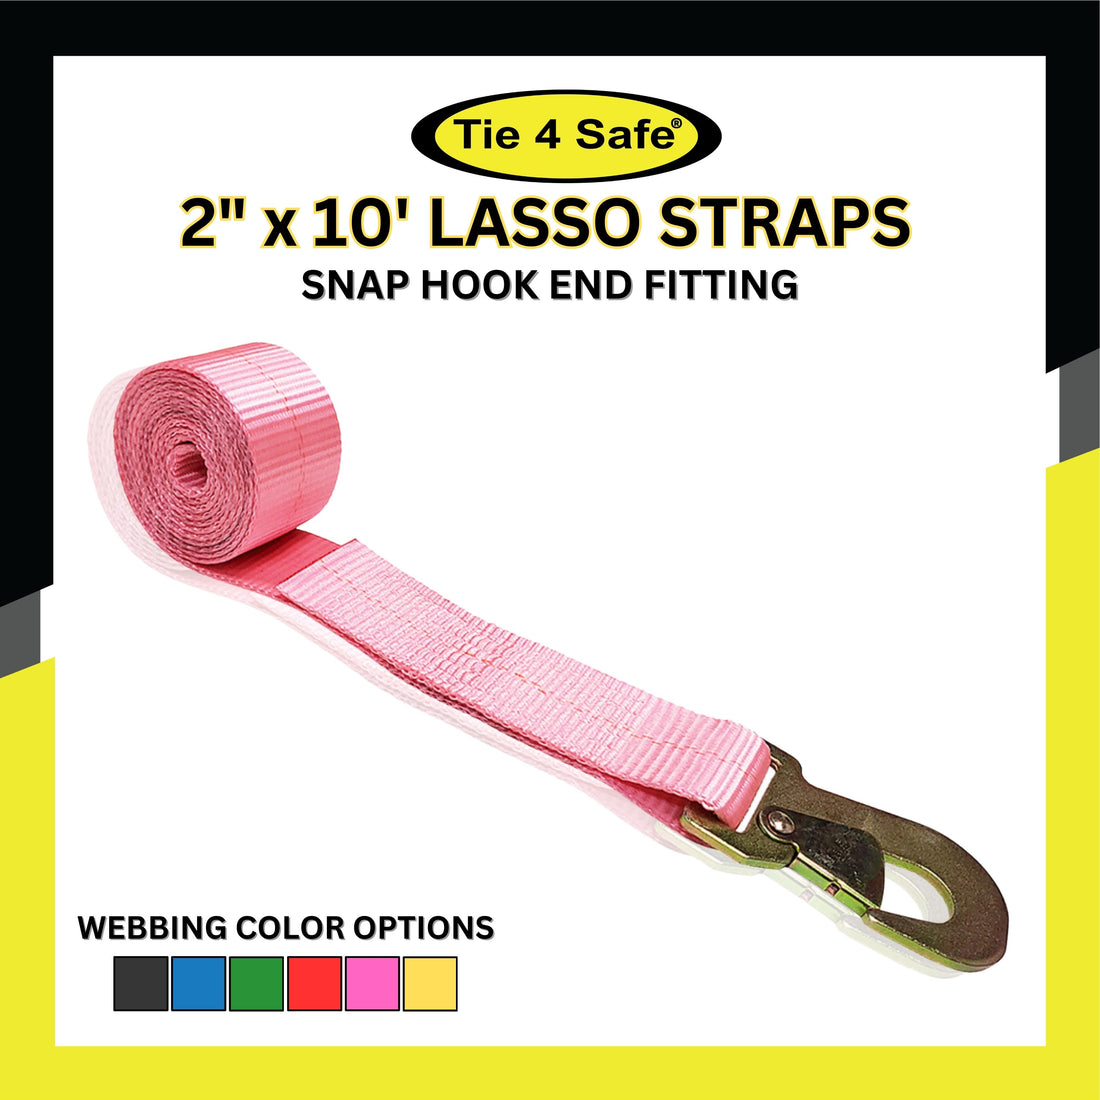 2" x 10' Wheel Lift Rollback Strap With Flat Snap Hook